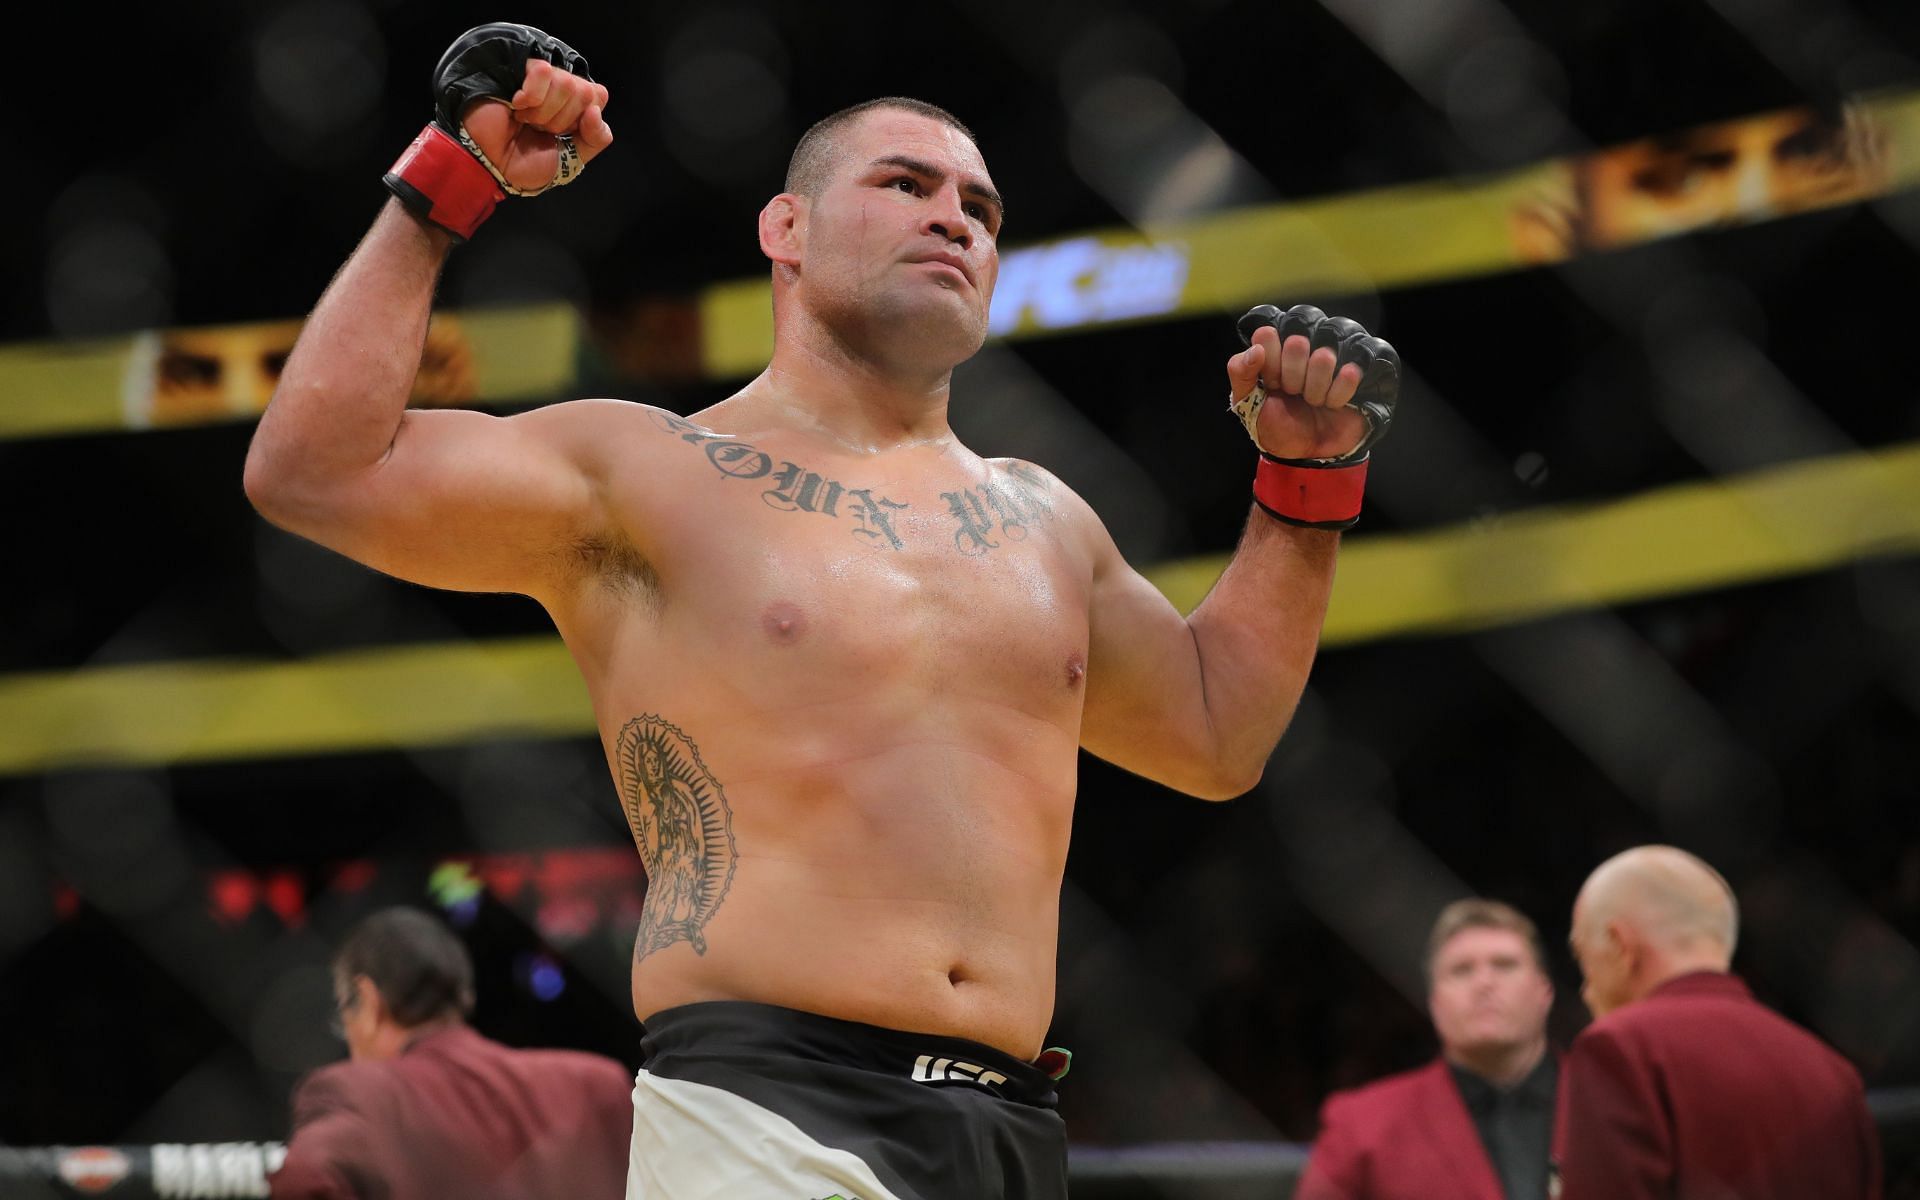 Cain Velasquez is heralded among the greatest heavyweight MMA fighters ever